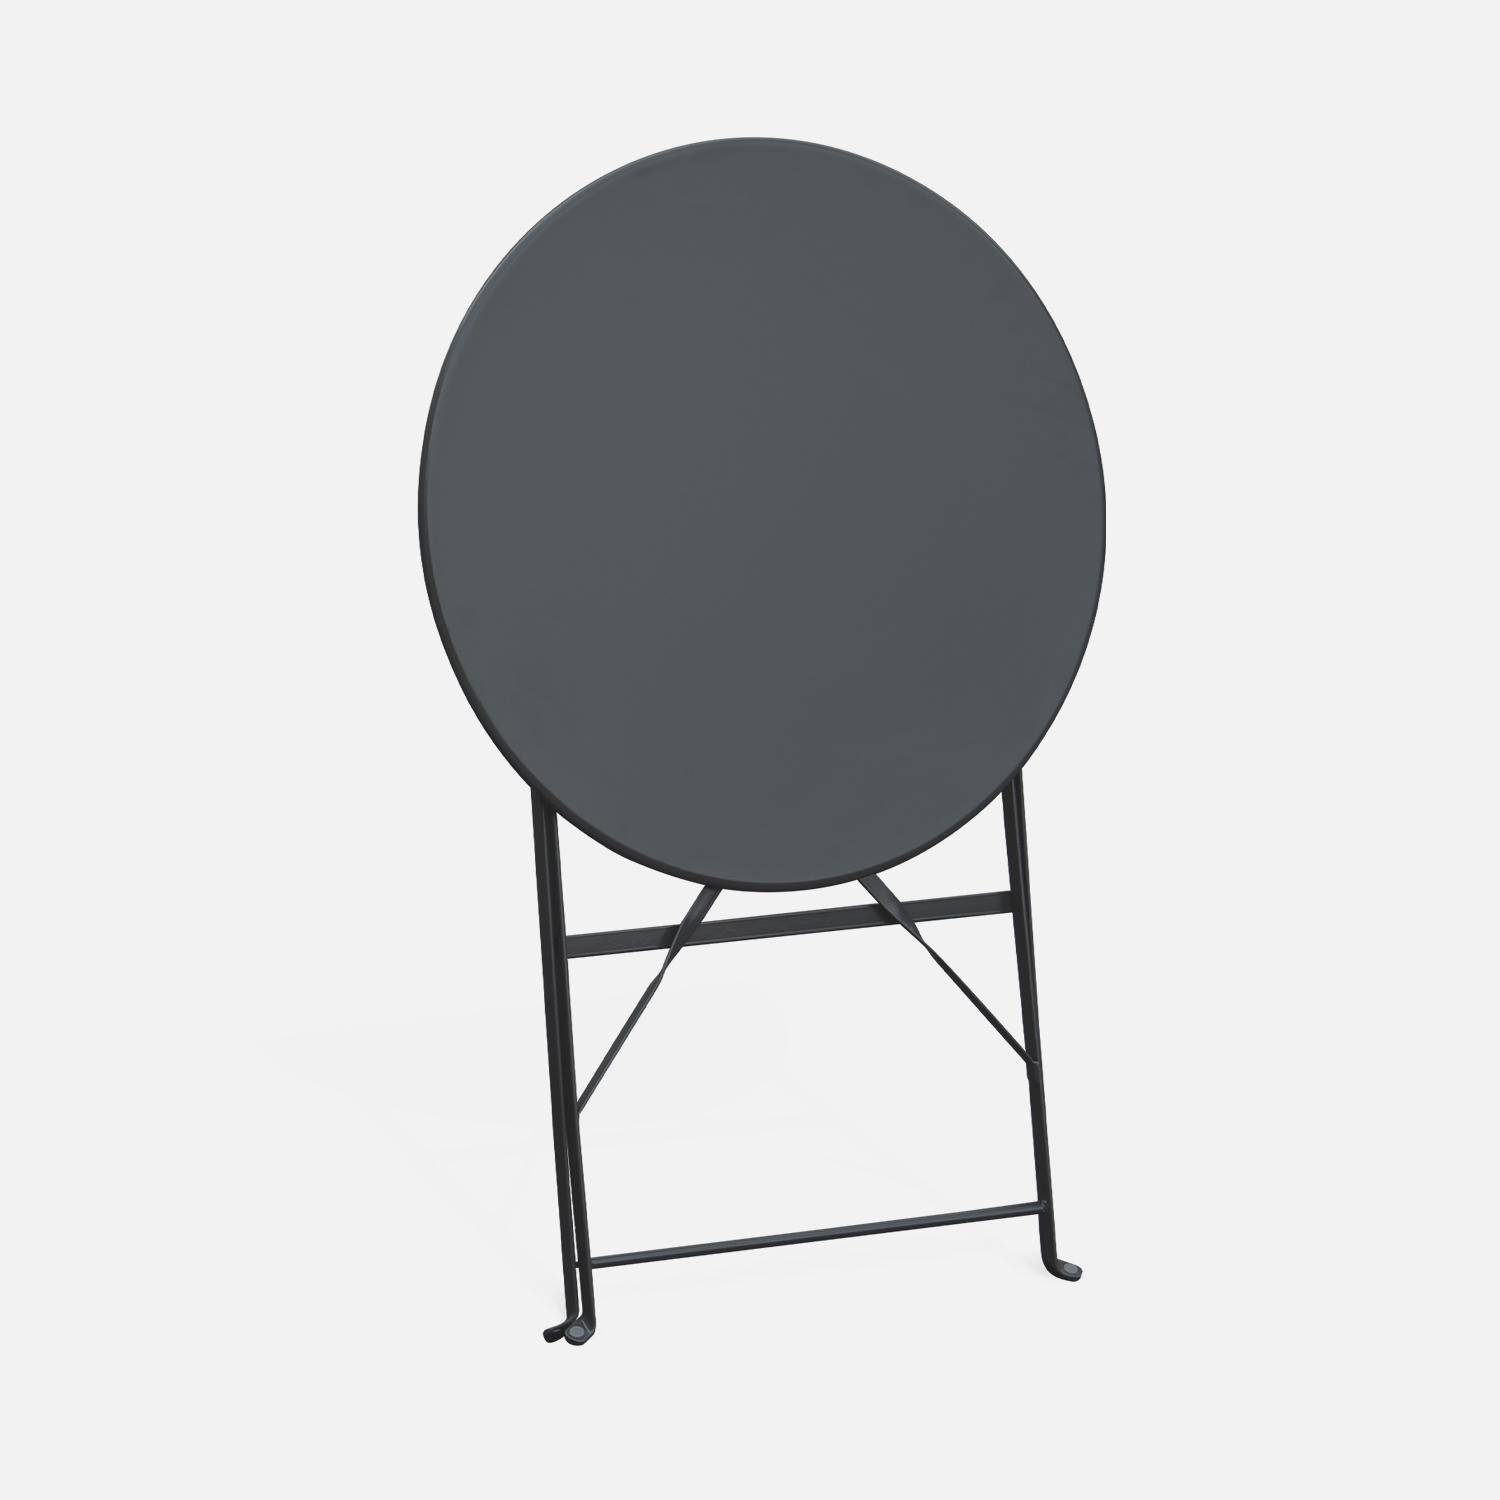 Foldable bistro garden table - Round Emilia anthracite- Round table Ø60cm, thermo-lacquered steel,sweeek,Photo5